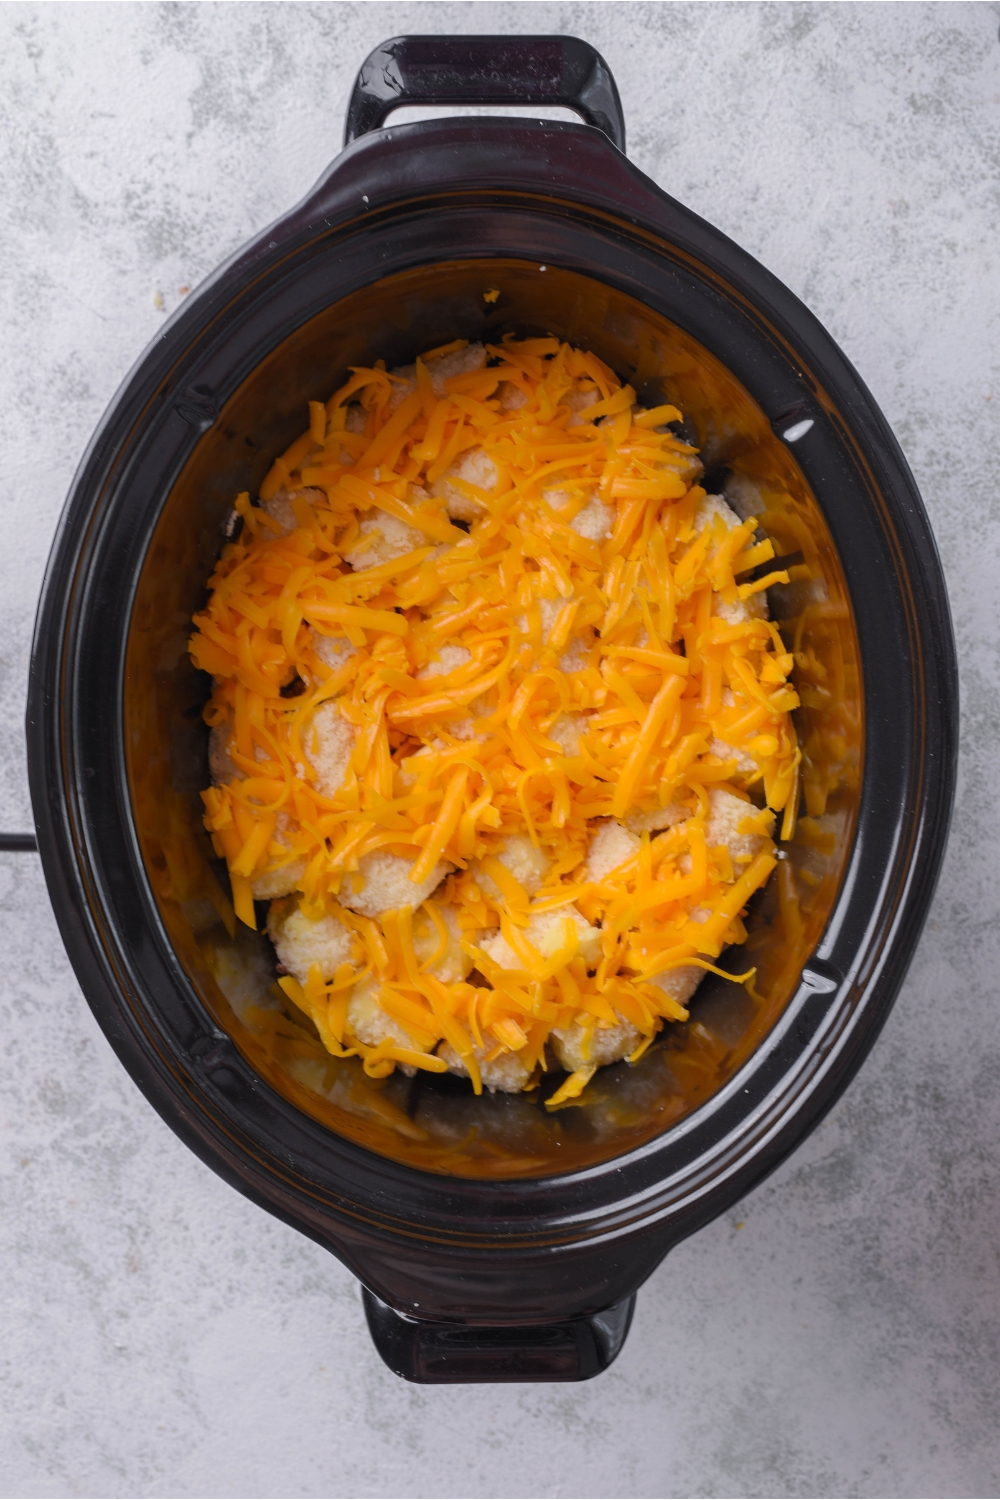 A slow cooker filled with tater tots and a layer of shredded cheese on top of the tater tots.